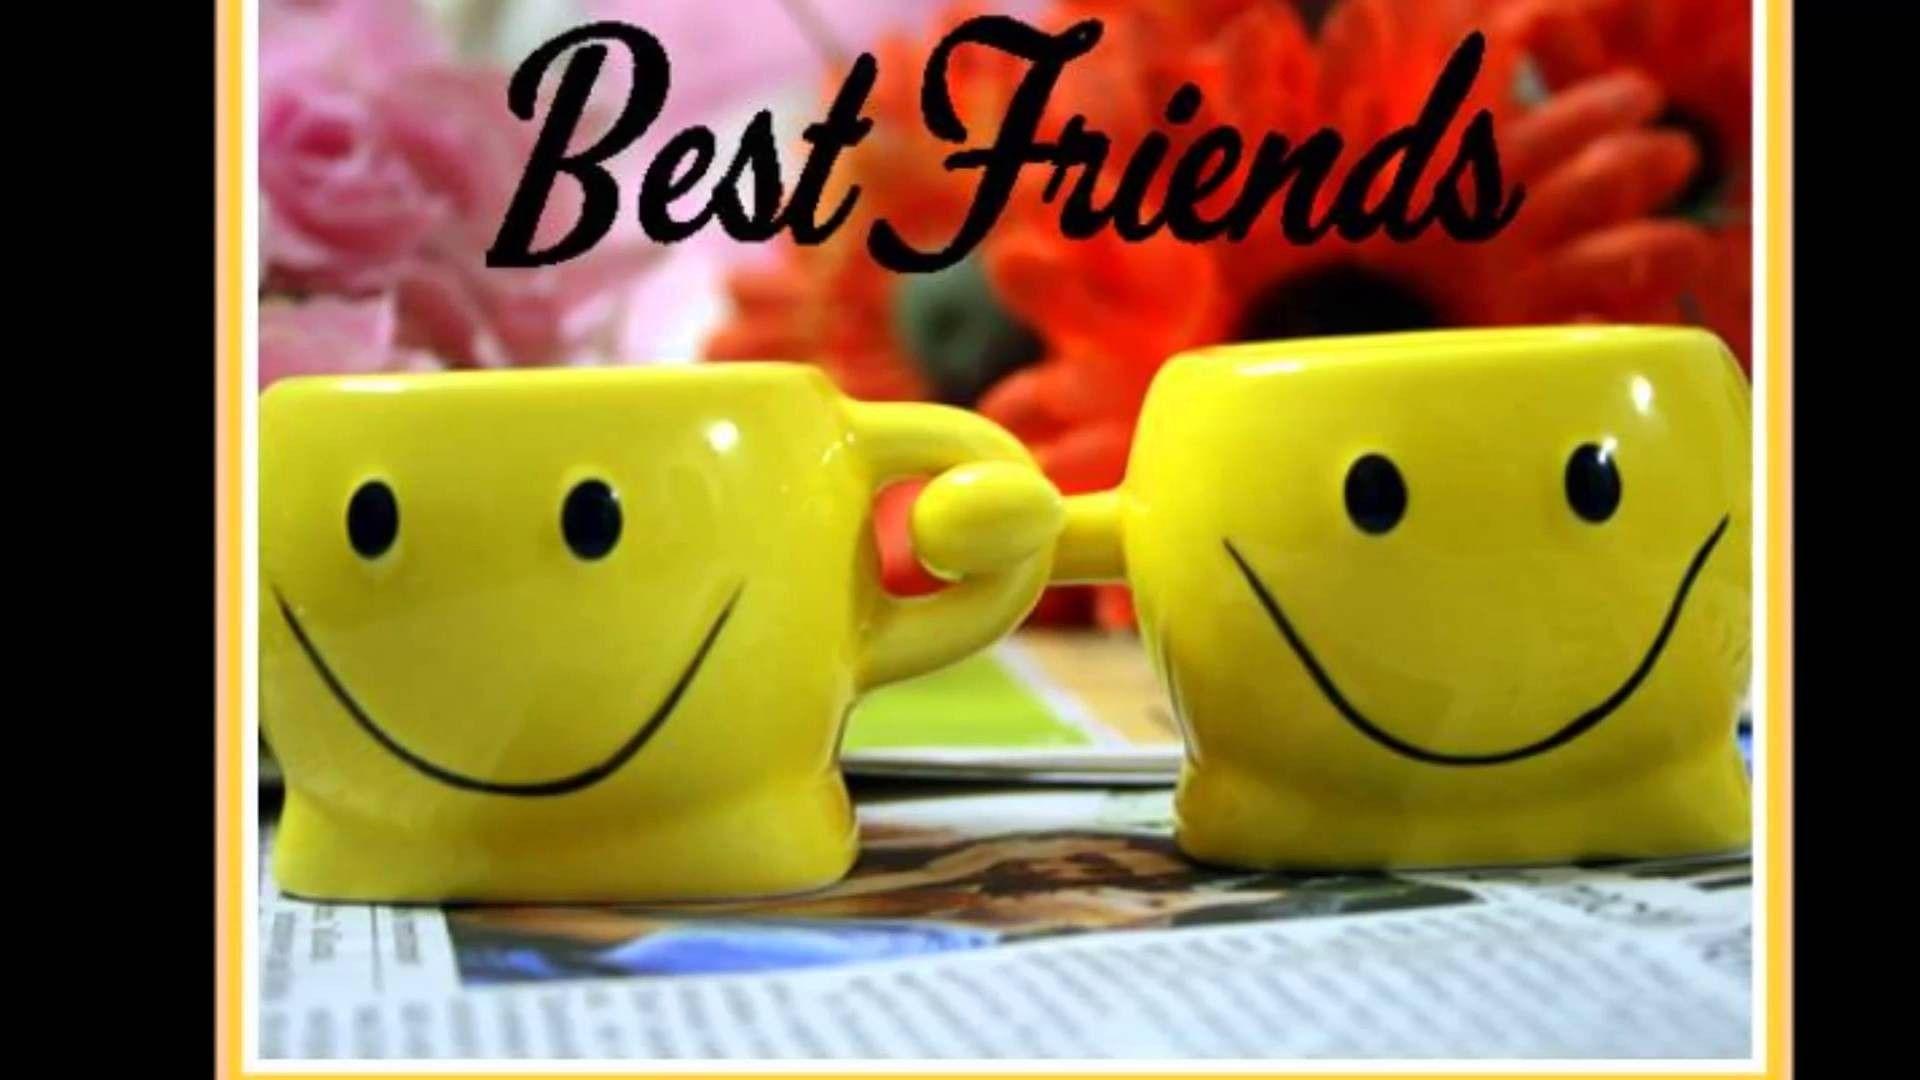 Cute Friendship Wallpaper with Messages Hindi